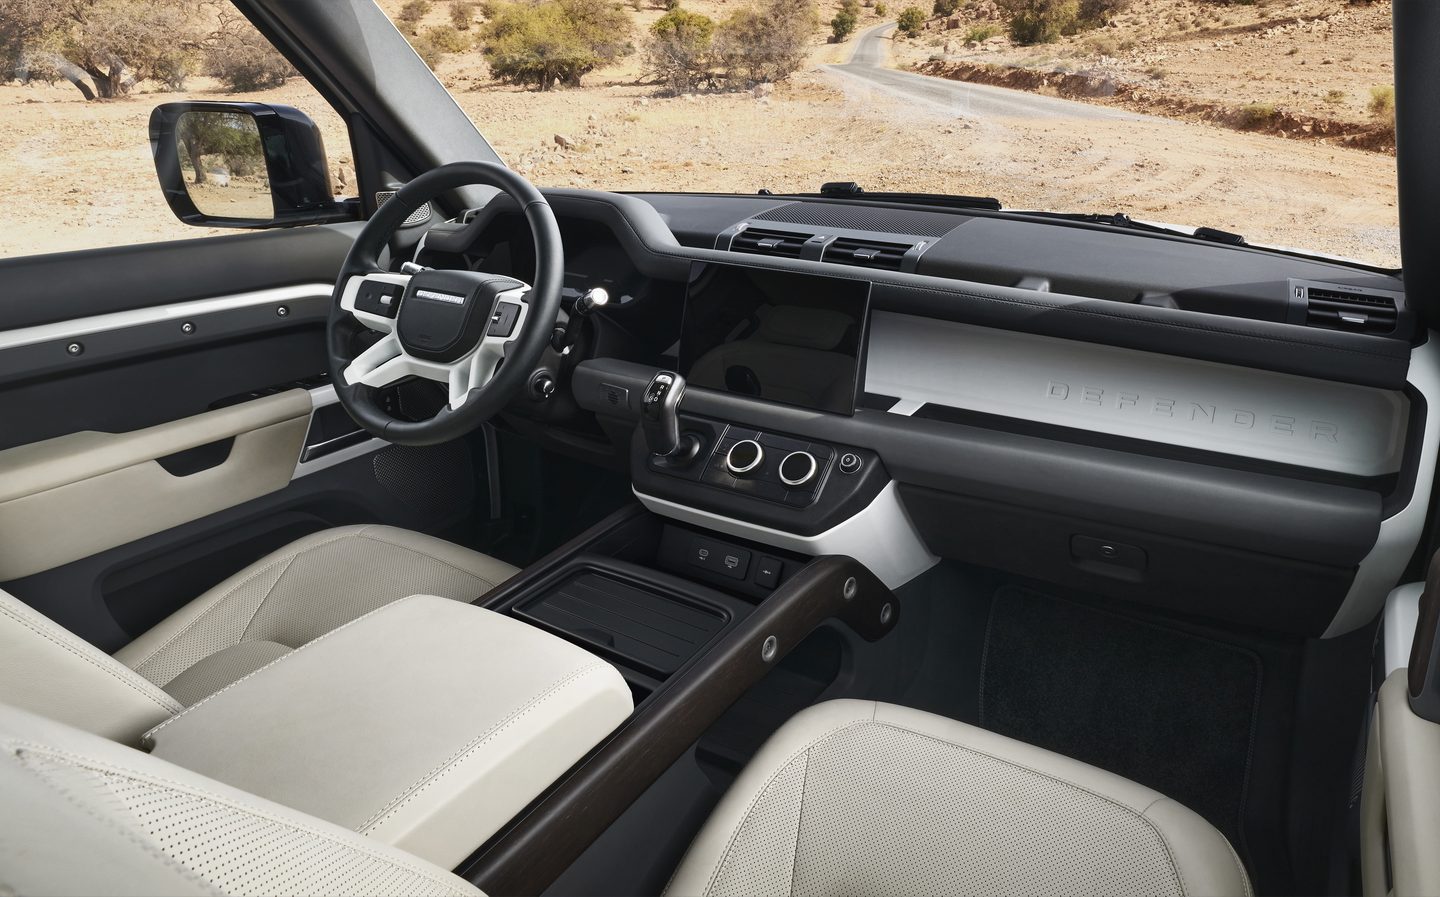 defender, land rover, land rover defender 130 review 2023: it's the size that counts with lengthened landy